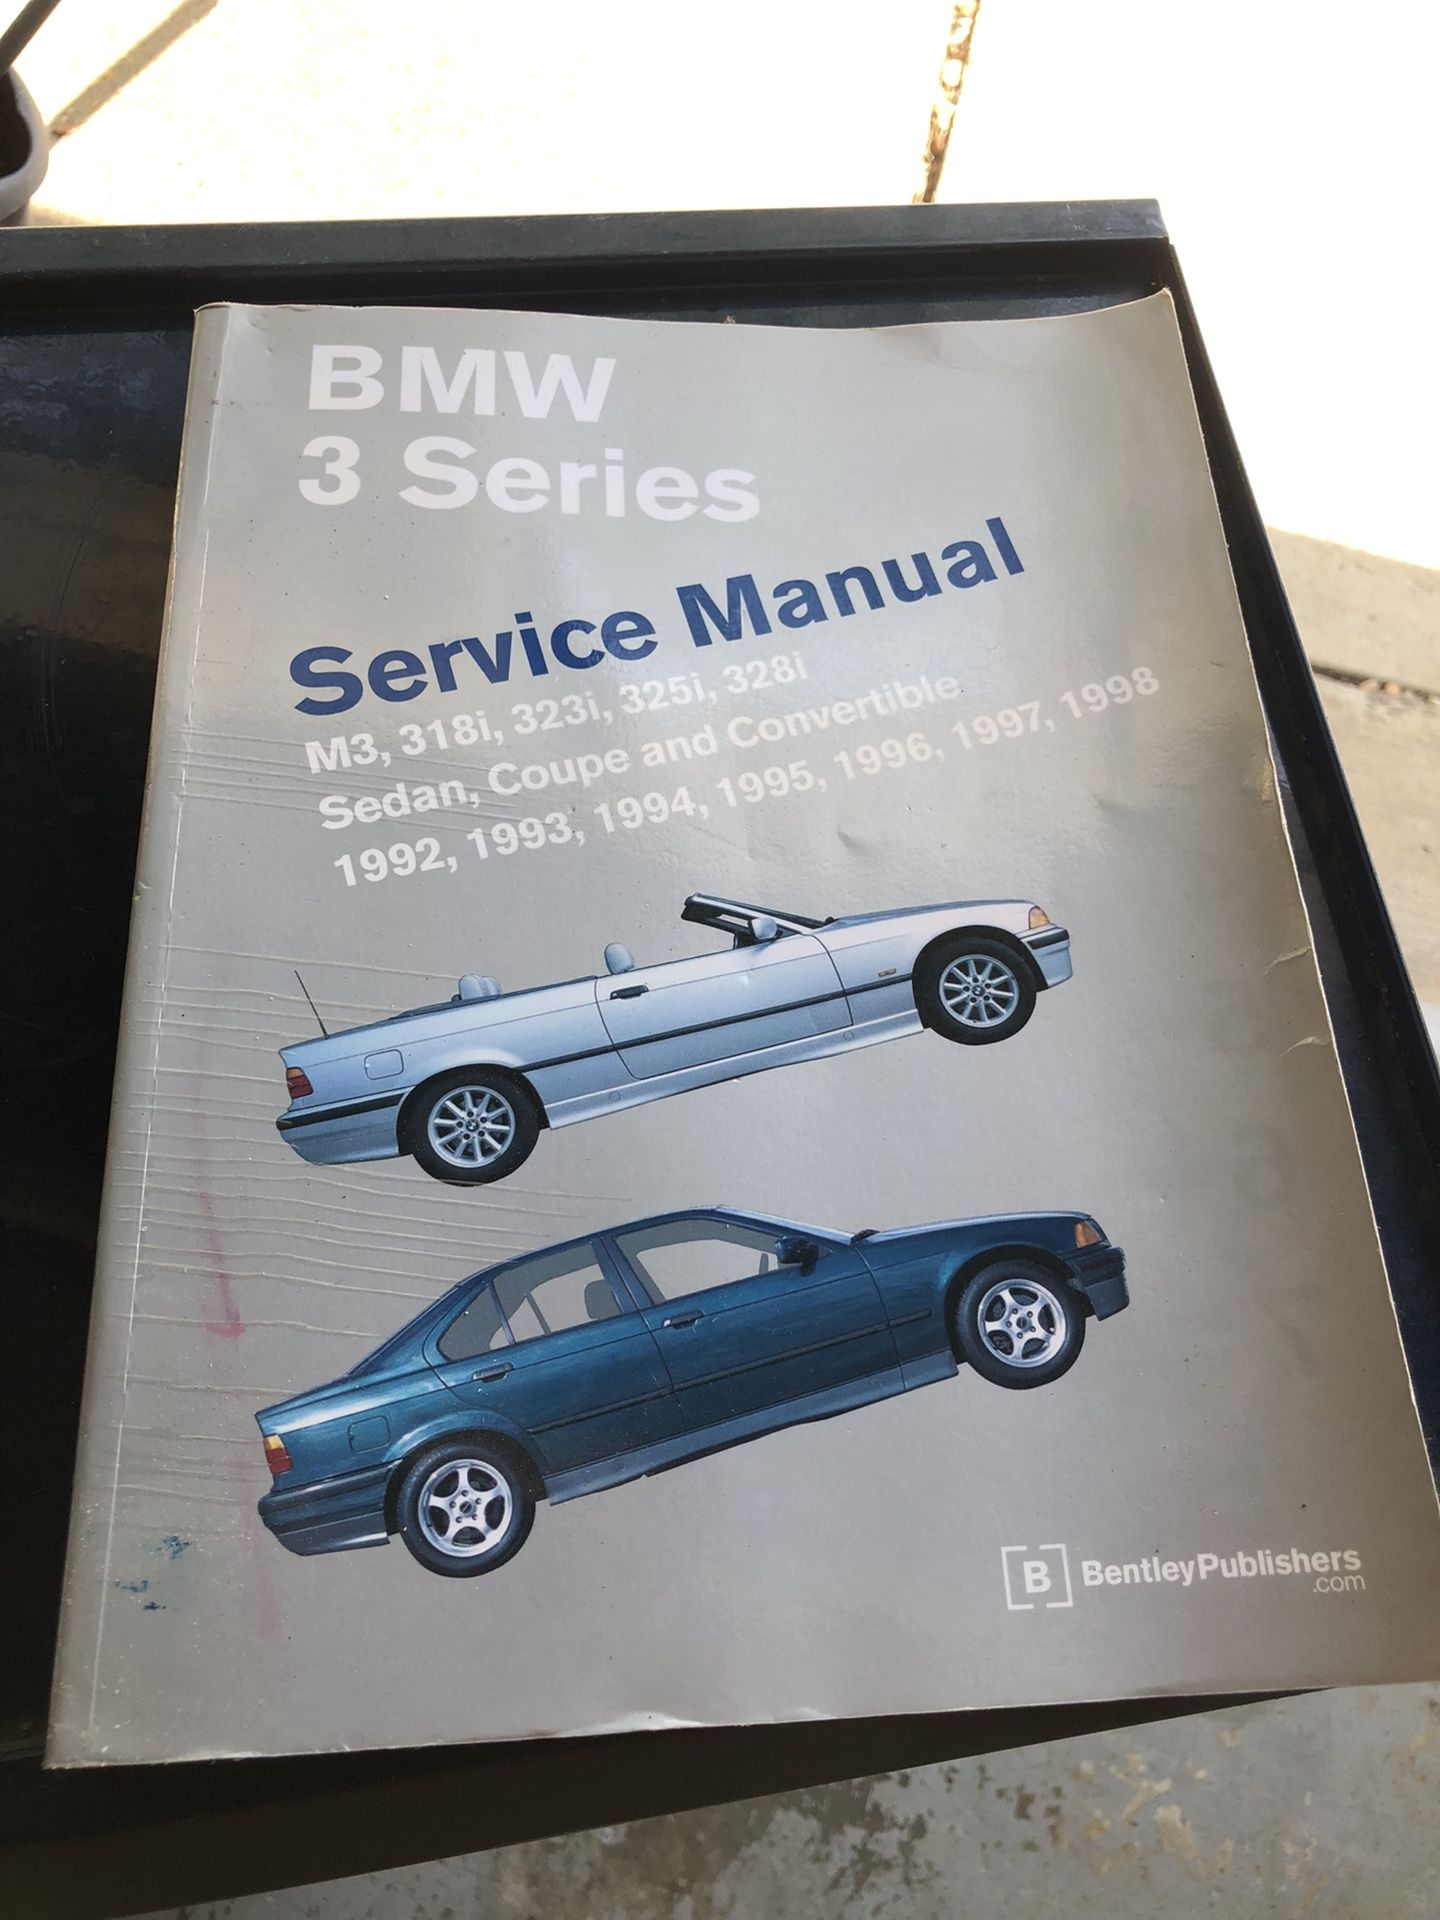 BMW 3 Series 1(contact info removed) Service Manual